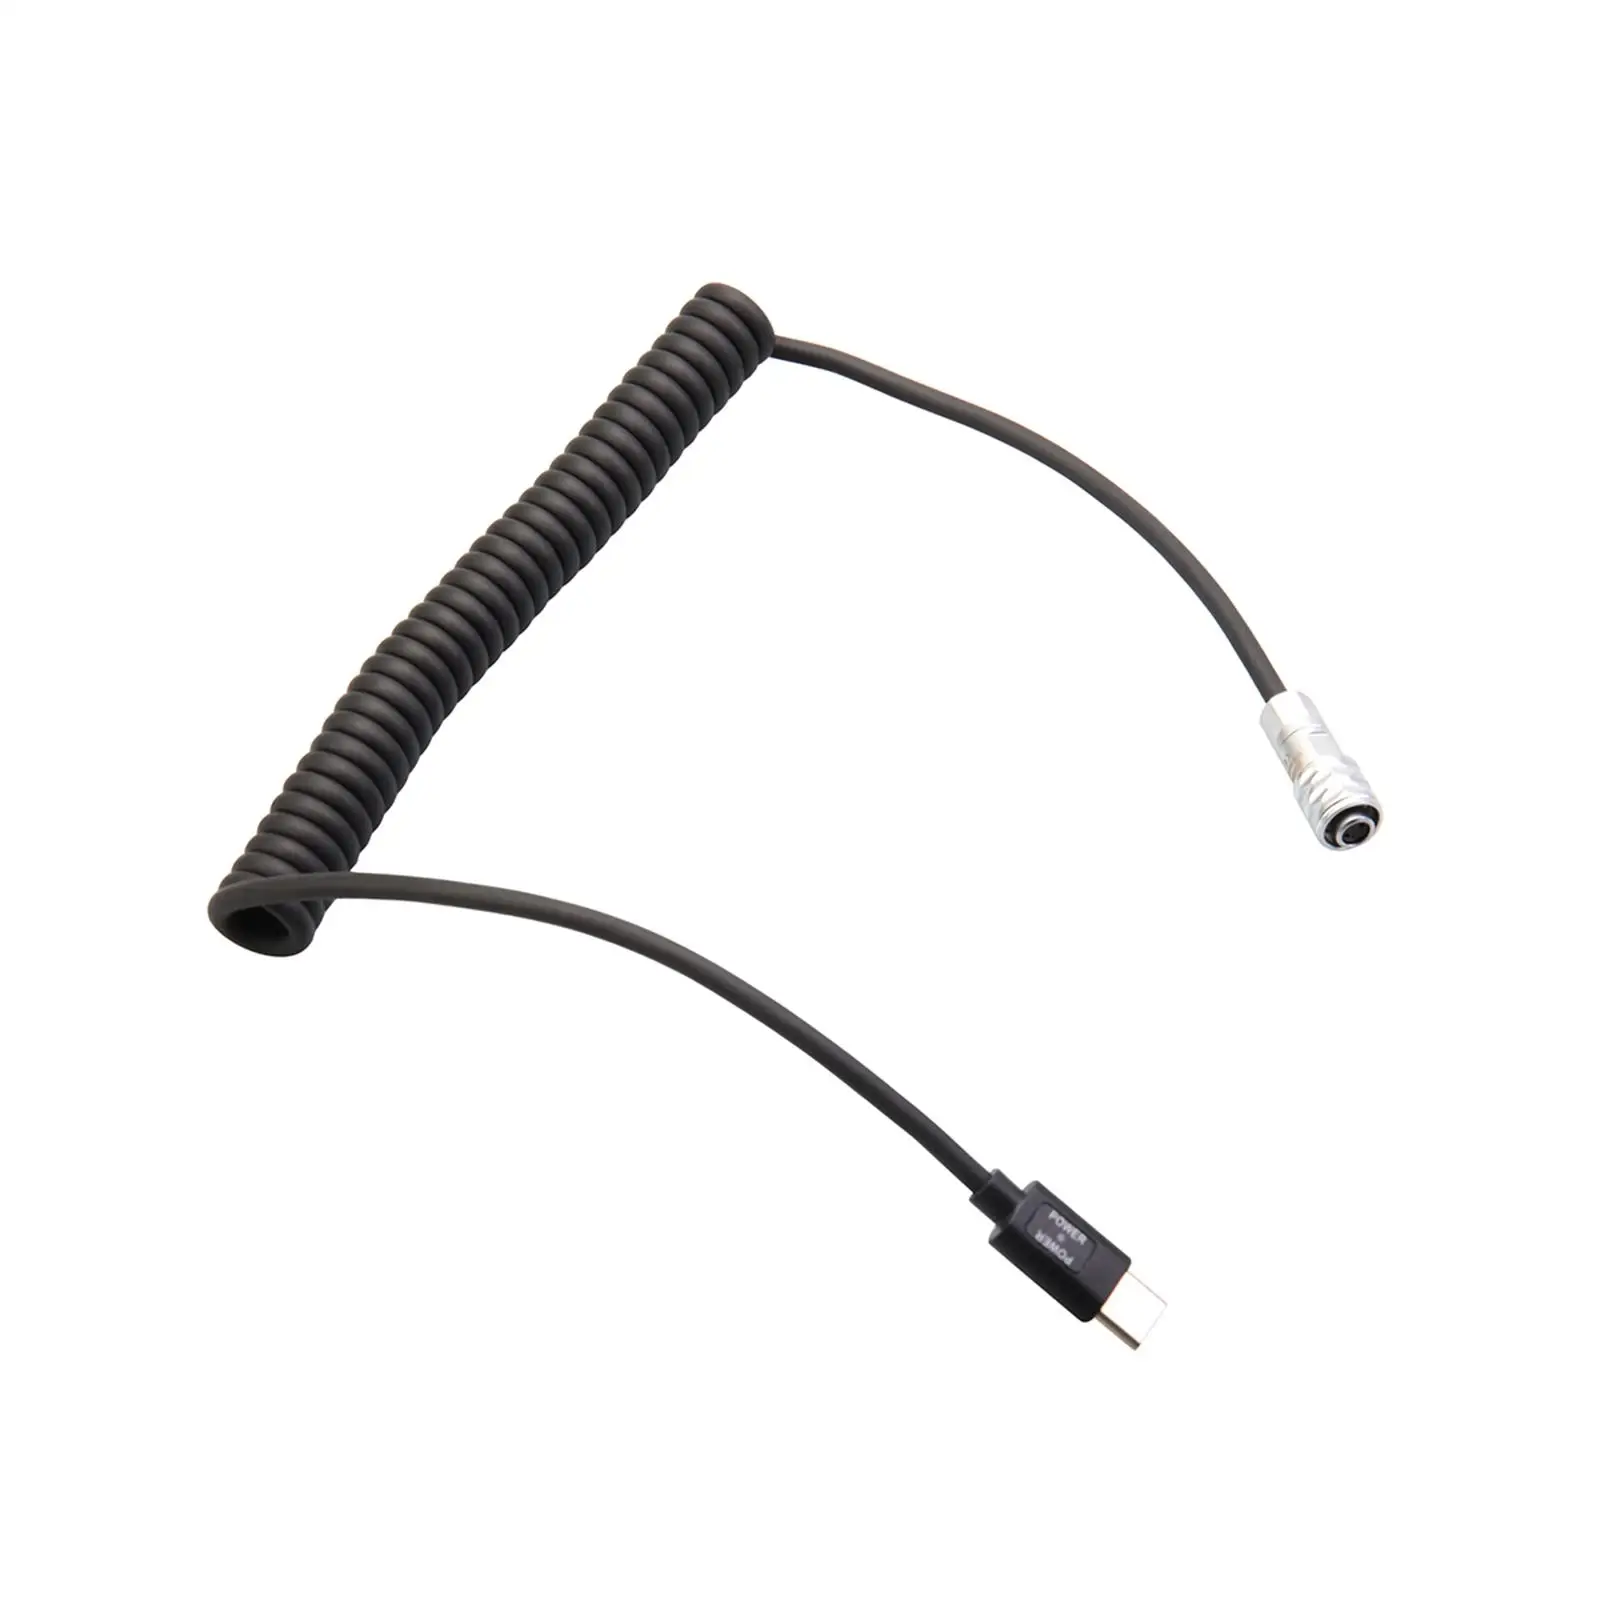  PD , 2Pin to usb Stretchable Camera Battery Power Cable for Bmpcc 4K 6 Devices, Live , Power Cable, Black